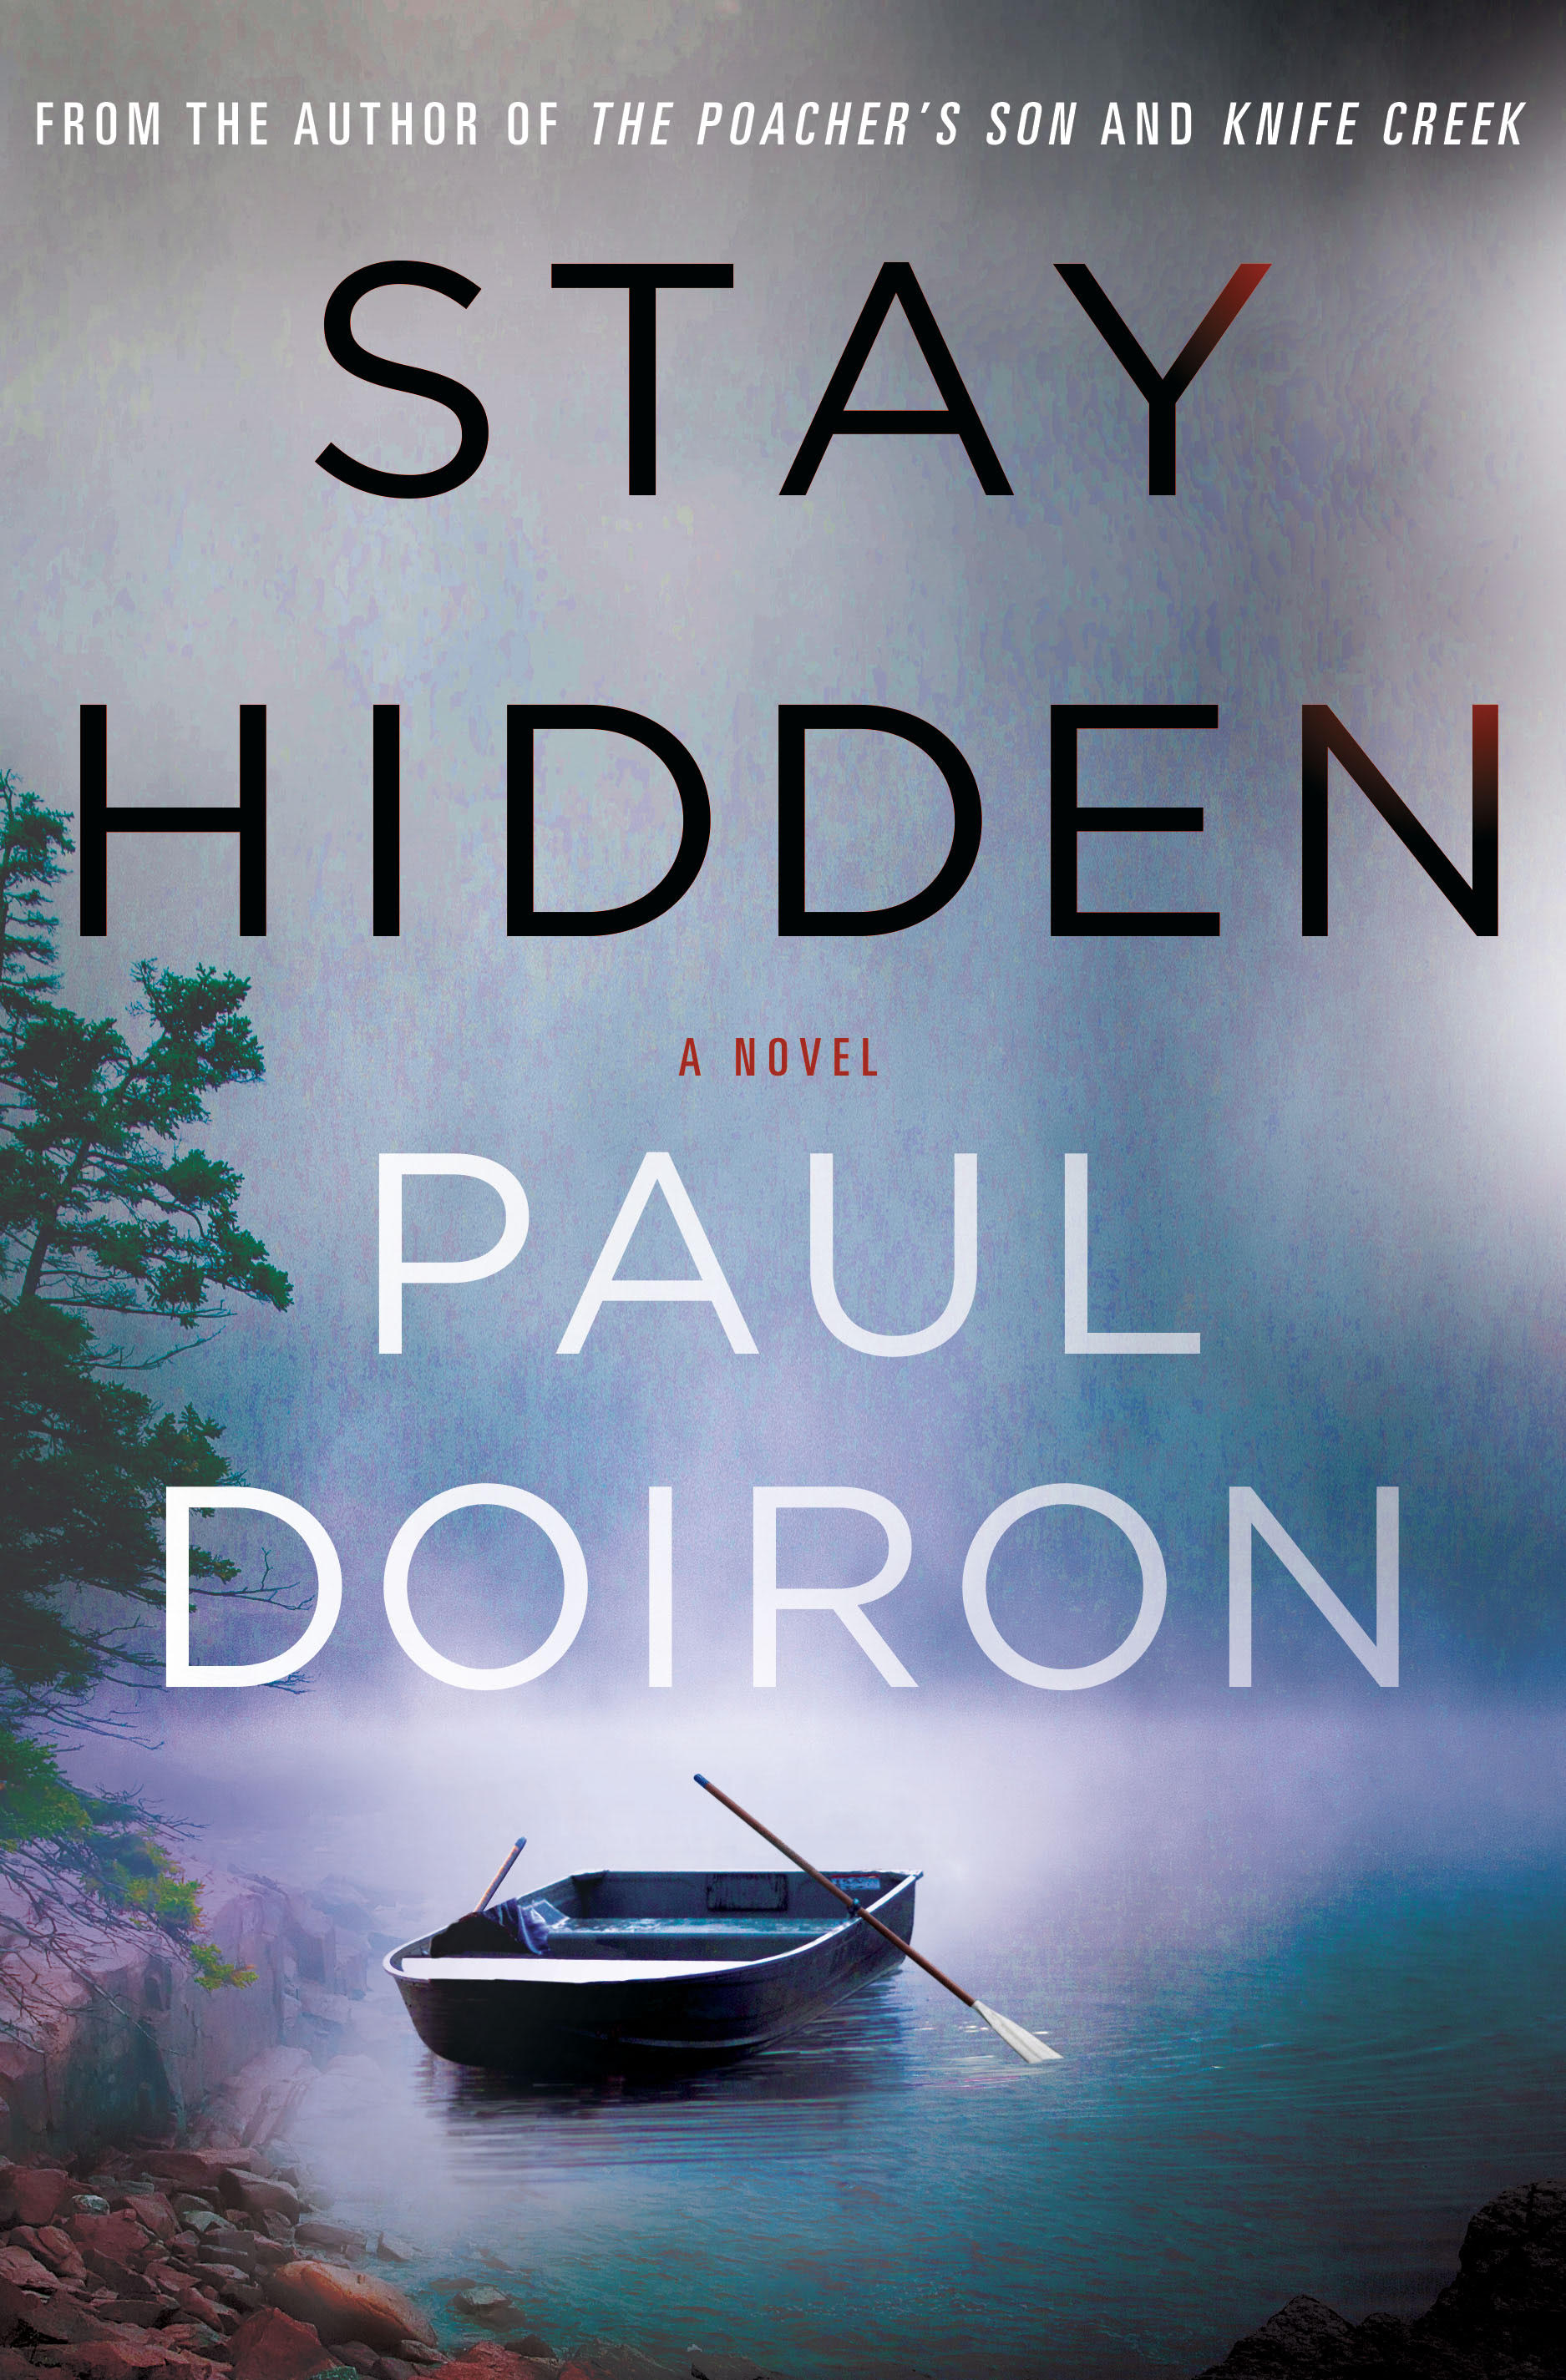 Cover of "Stay Hidden" by Paul Doiron